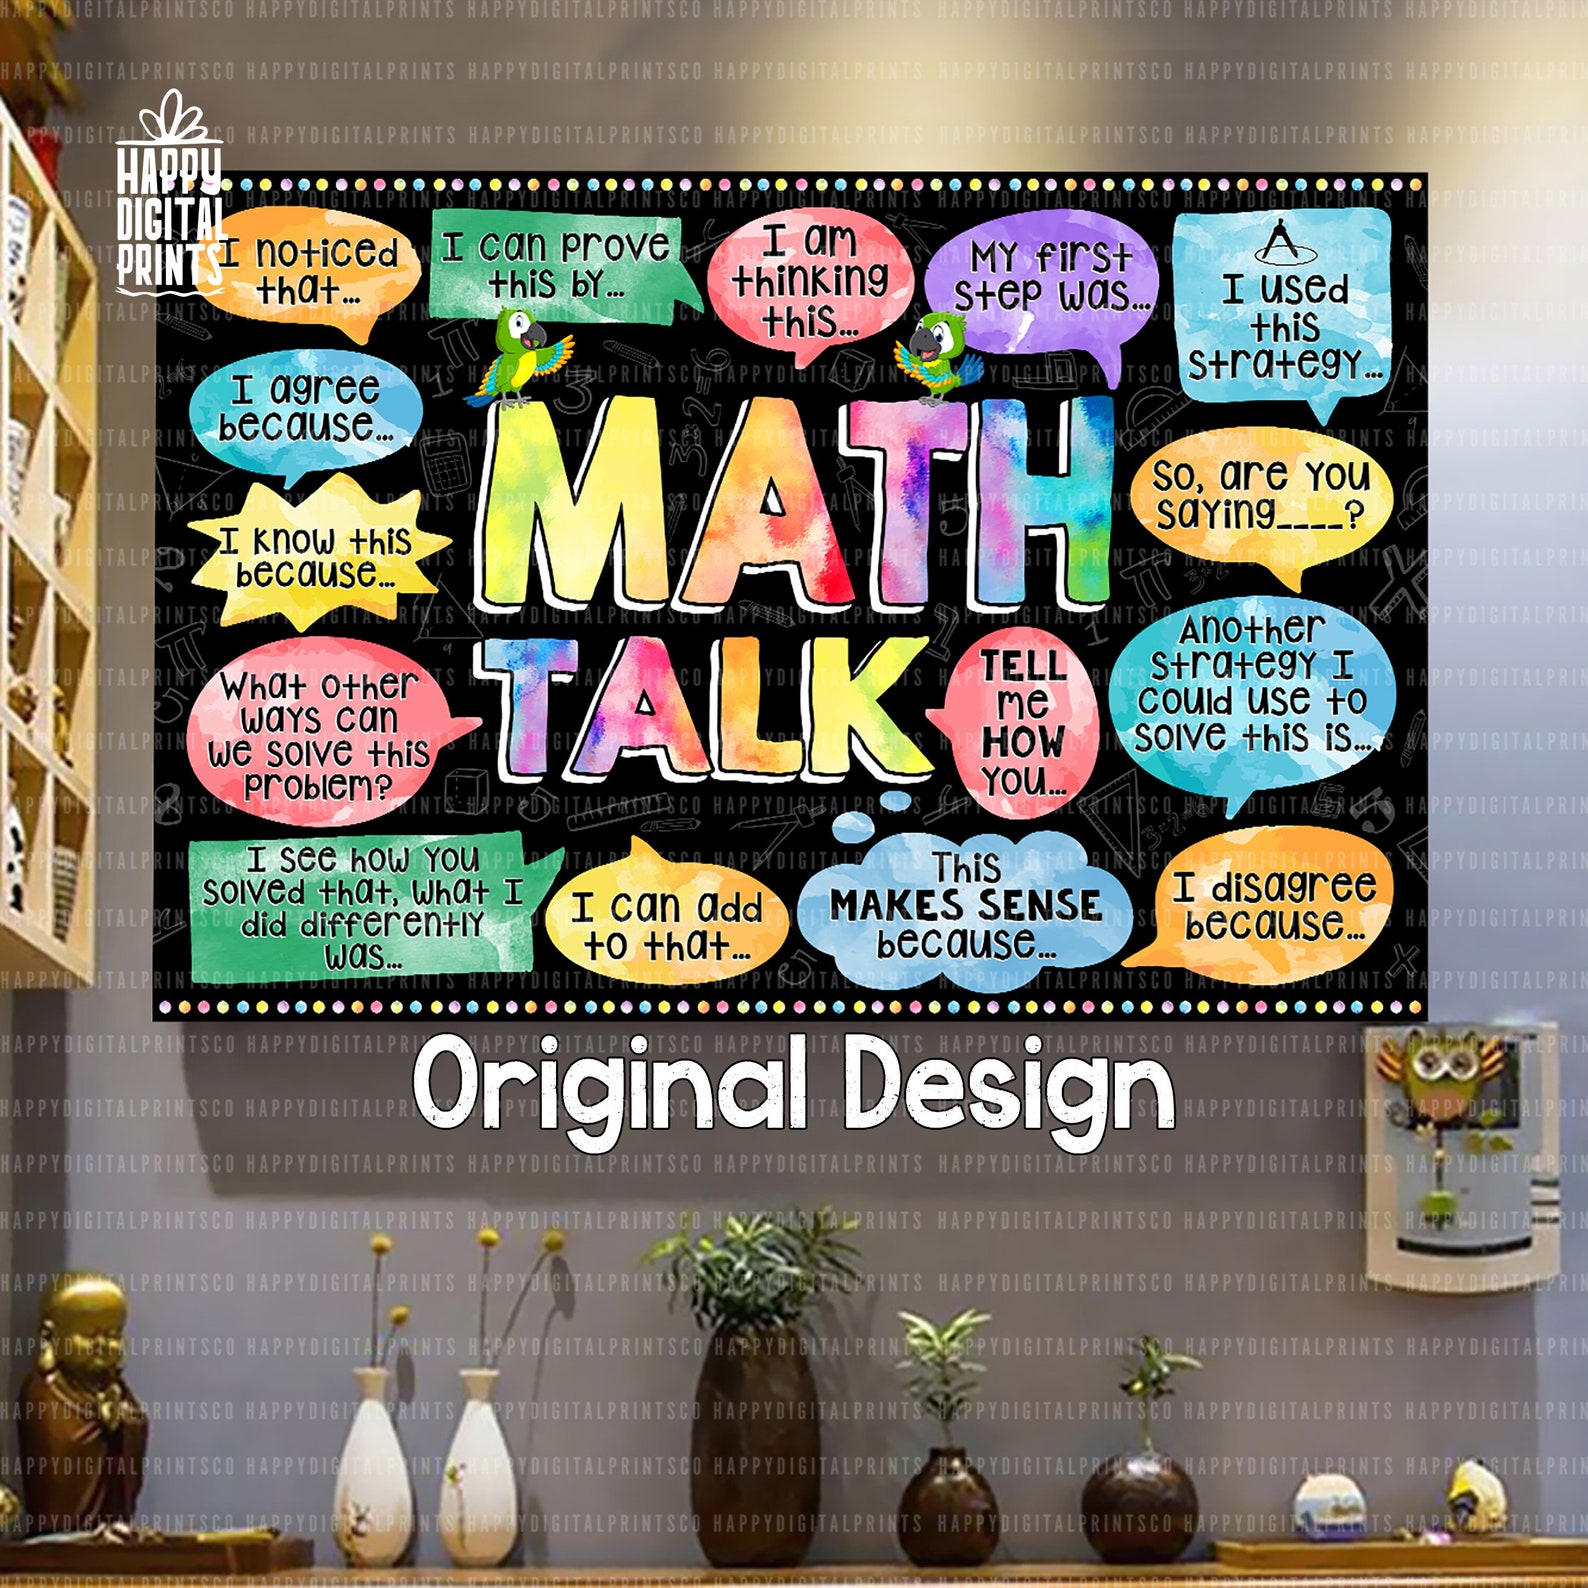 Printable Math Posters For The Classroom